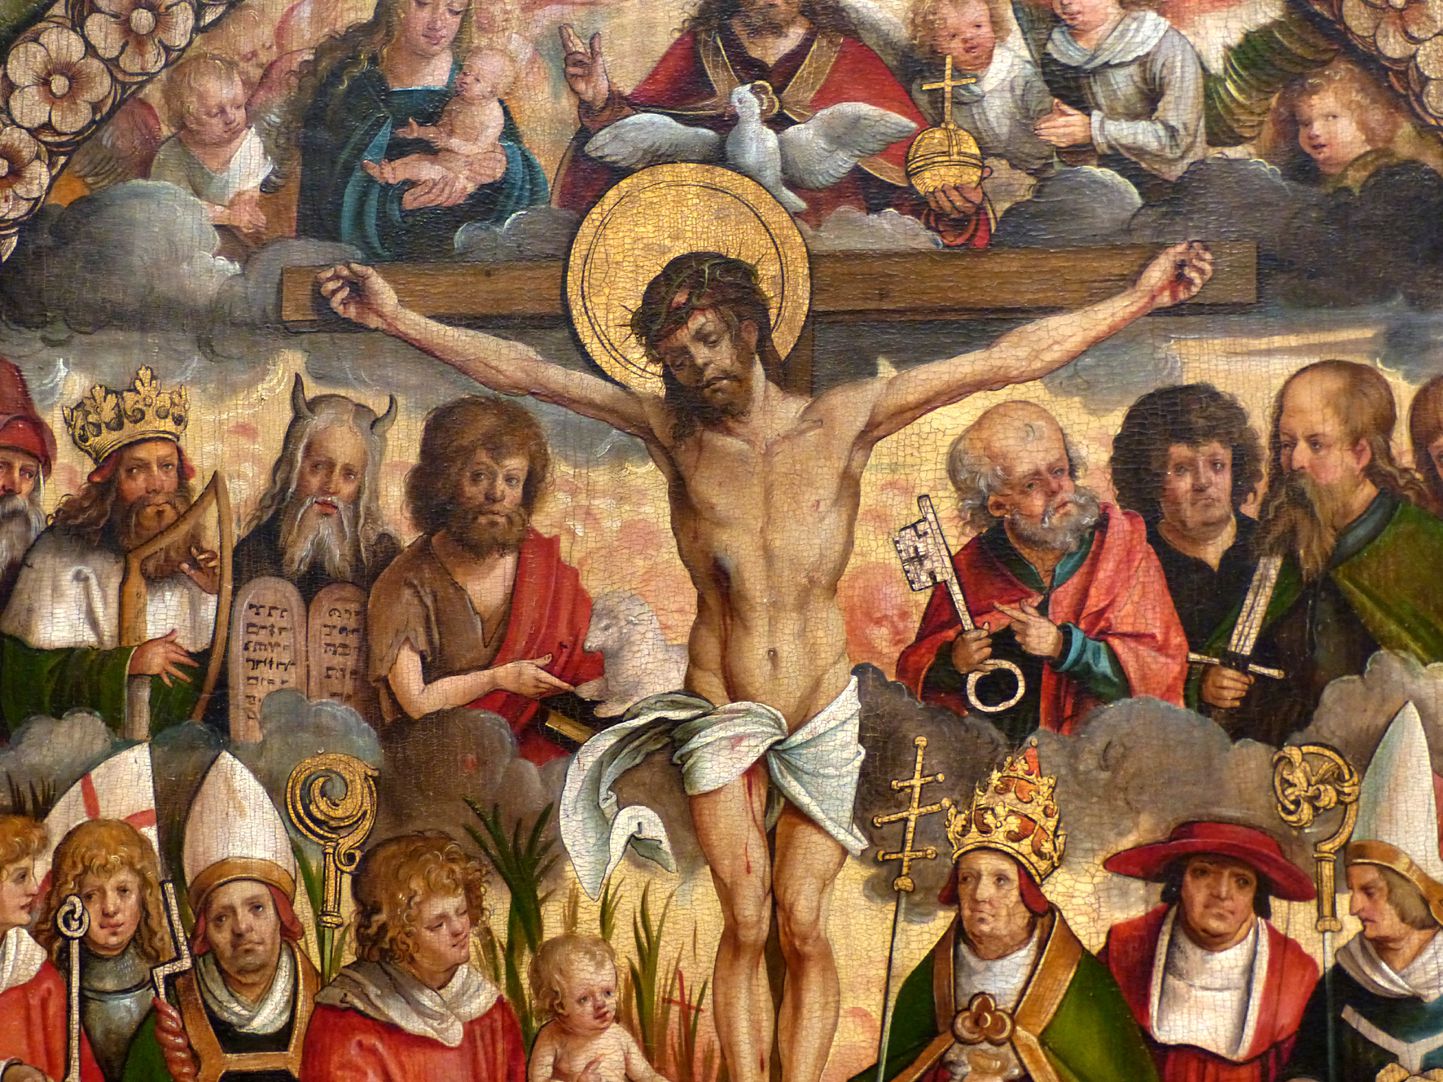 Rosary Triptych (Madrid) Centerpiece, detail, Christ among prophets, apostles, saints and fathers of the church